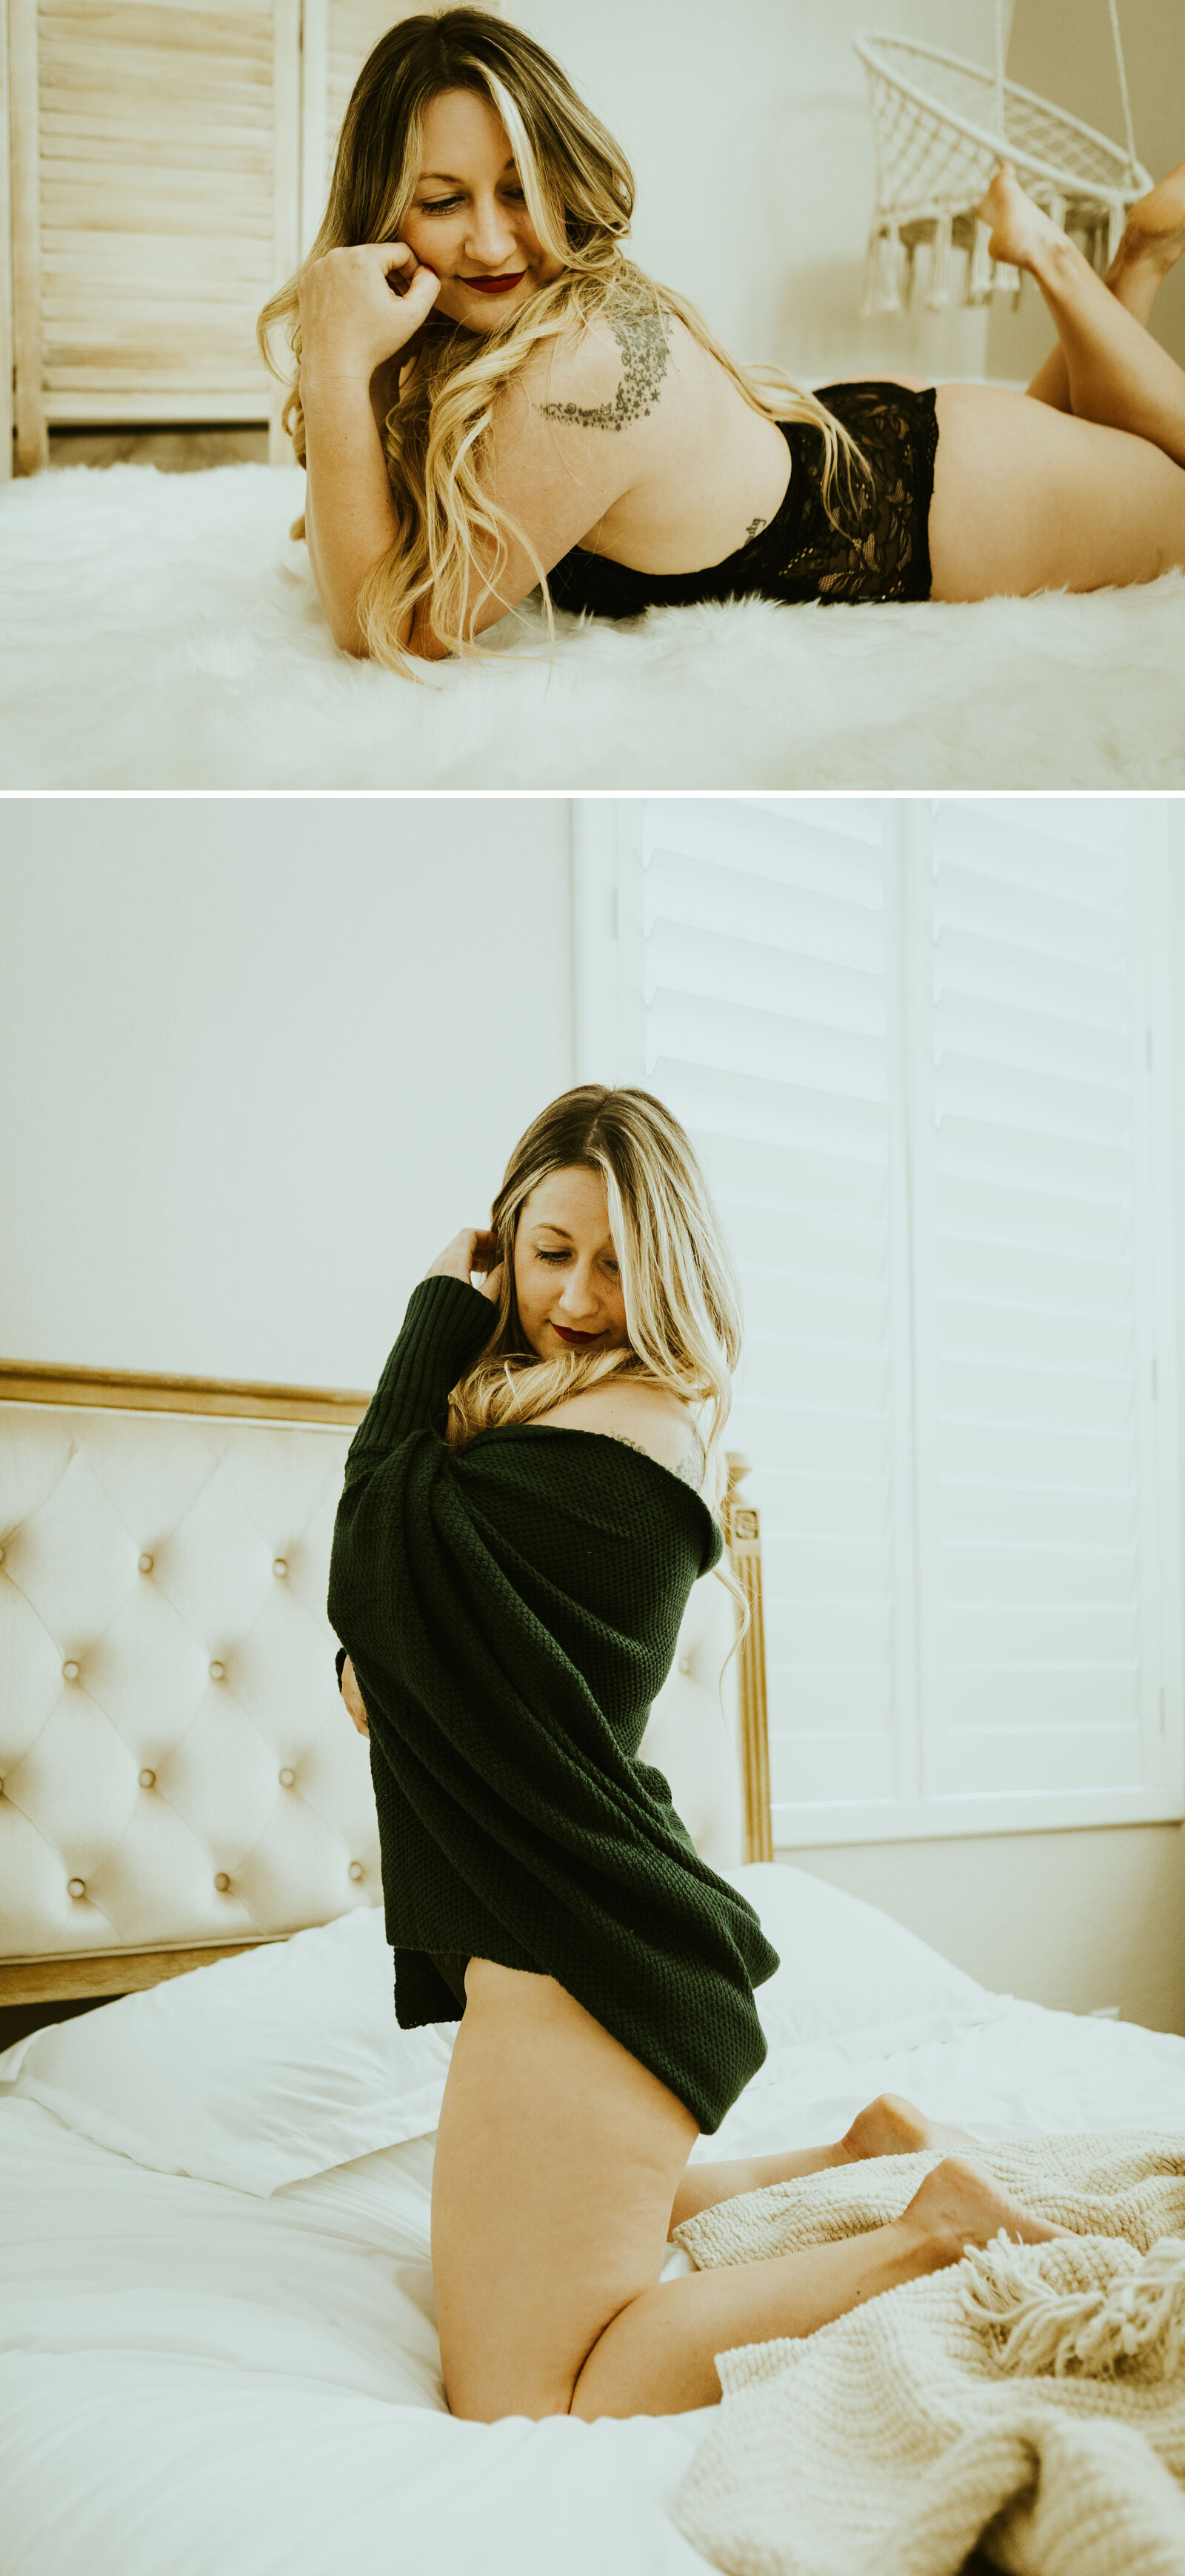 boudoir photos of a woman in a cardigan sitting in bed.jpg